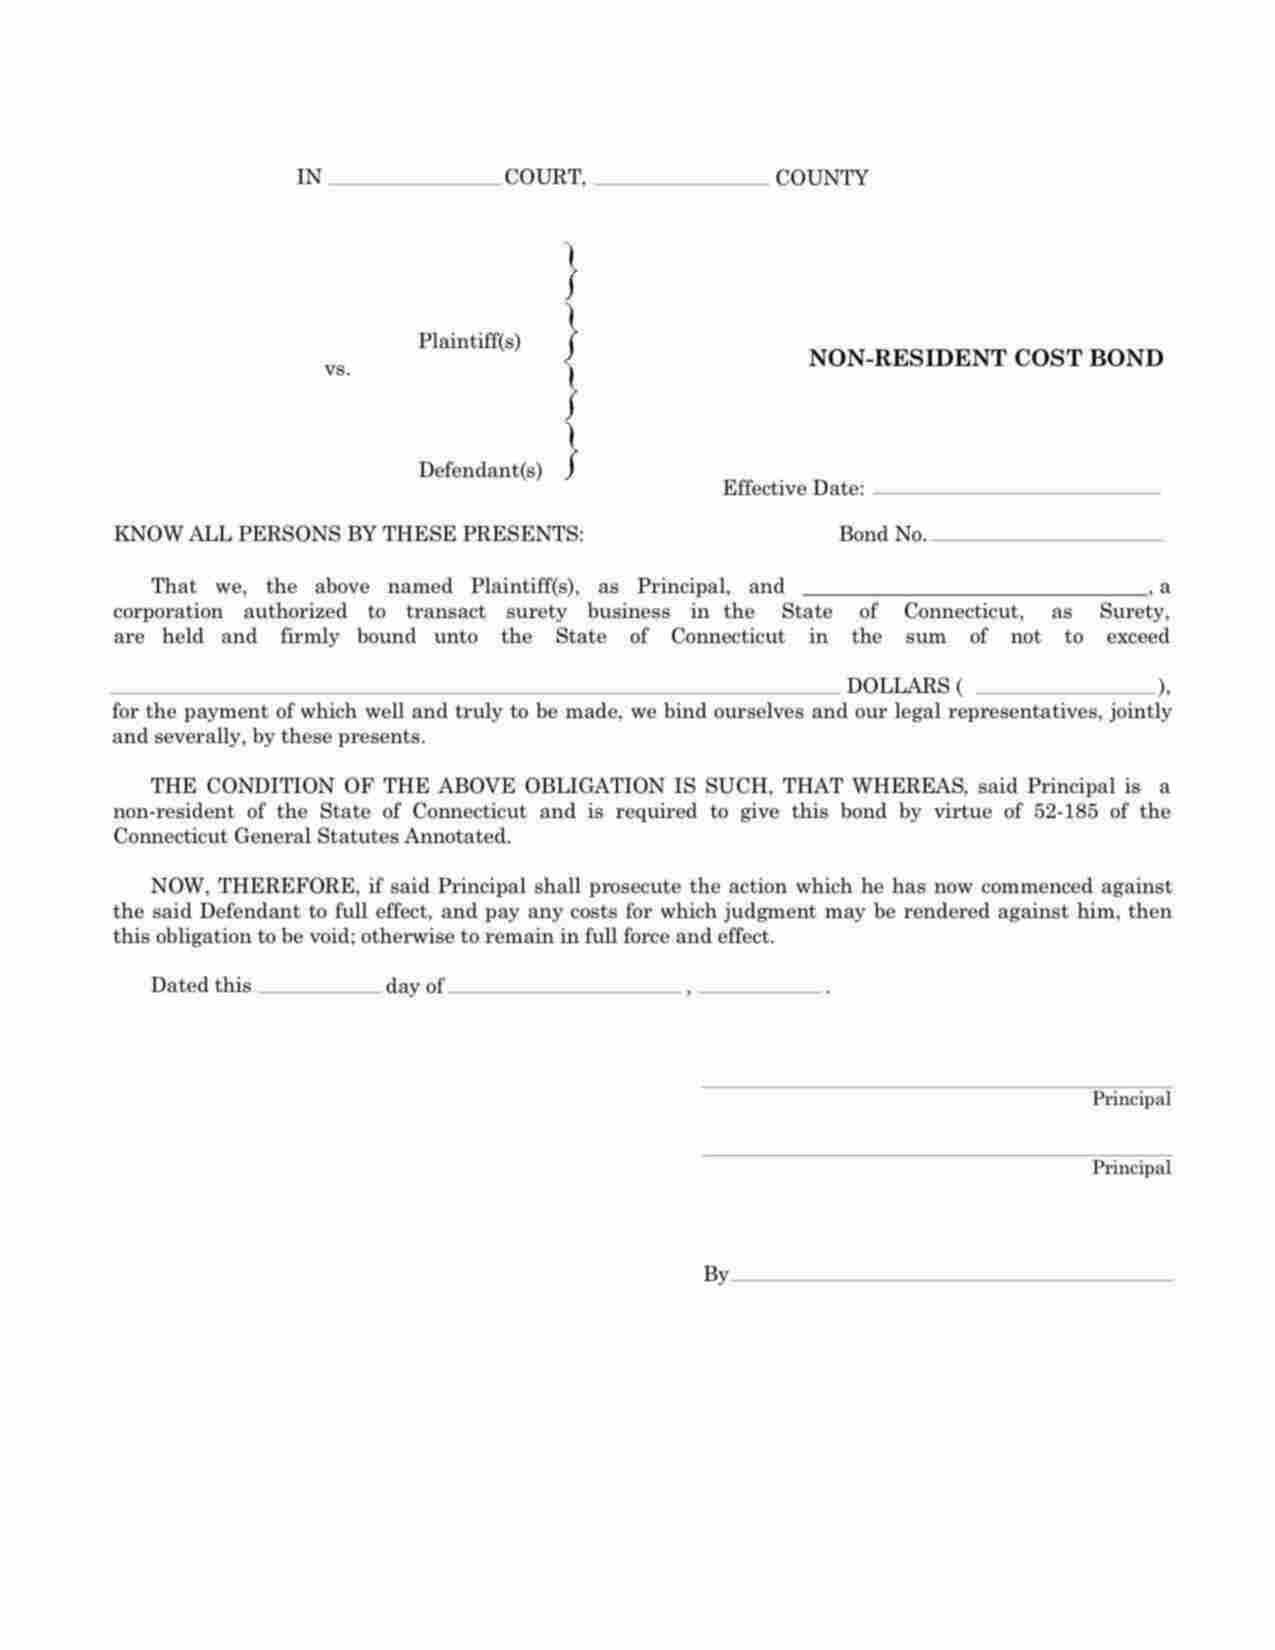 Connecticut Non-Resident Cost Bond Form